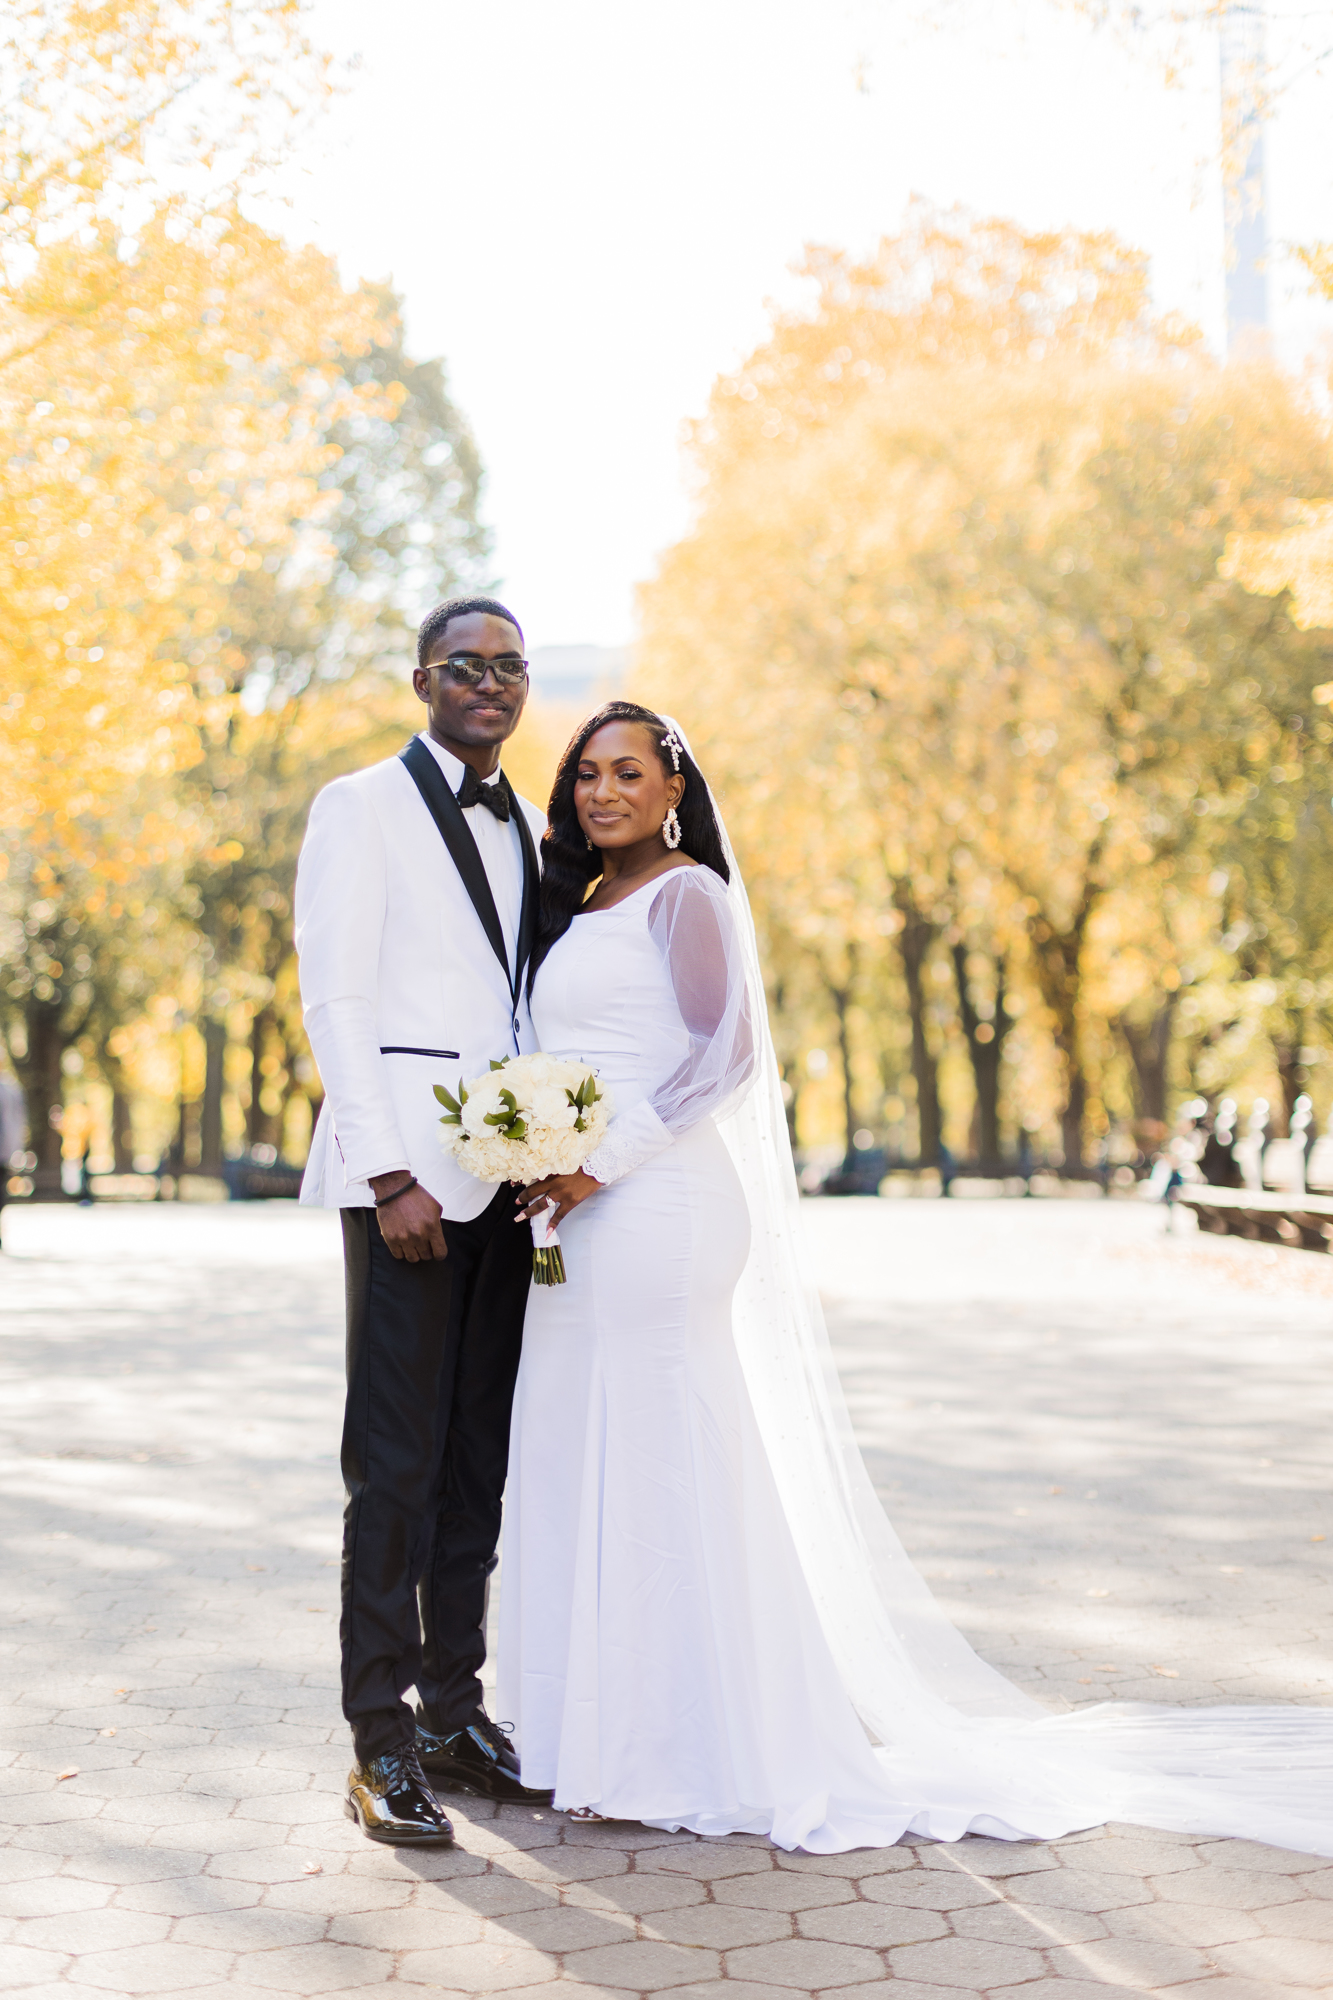 Perfect Central Park Wedding Photos on Cherry Hill in Fall